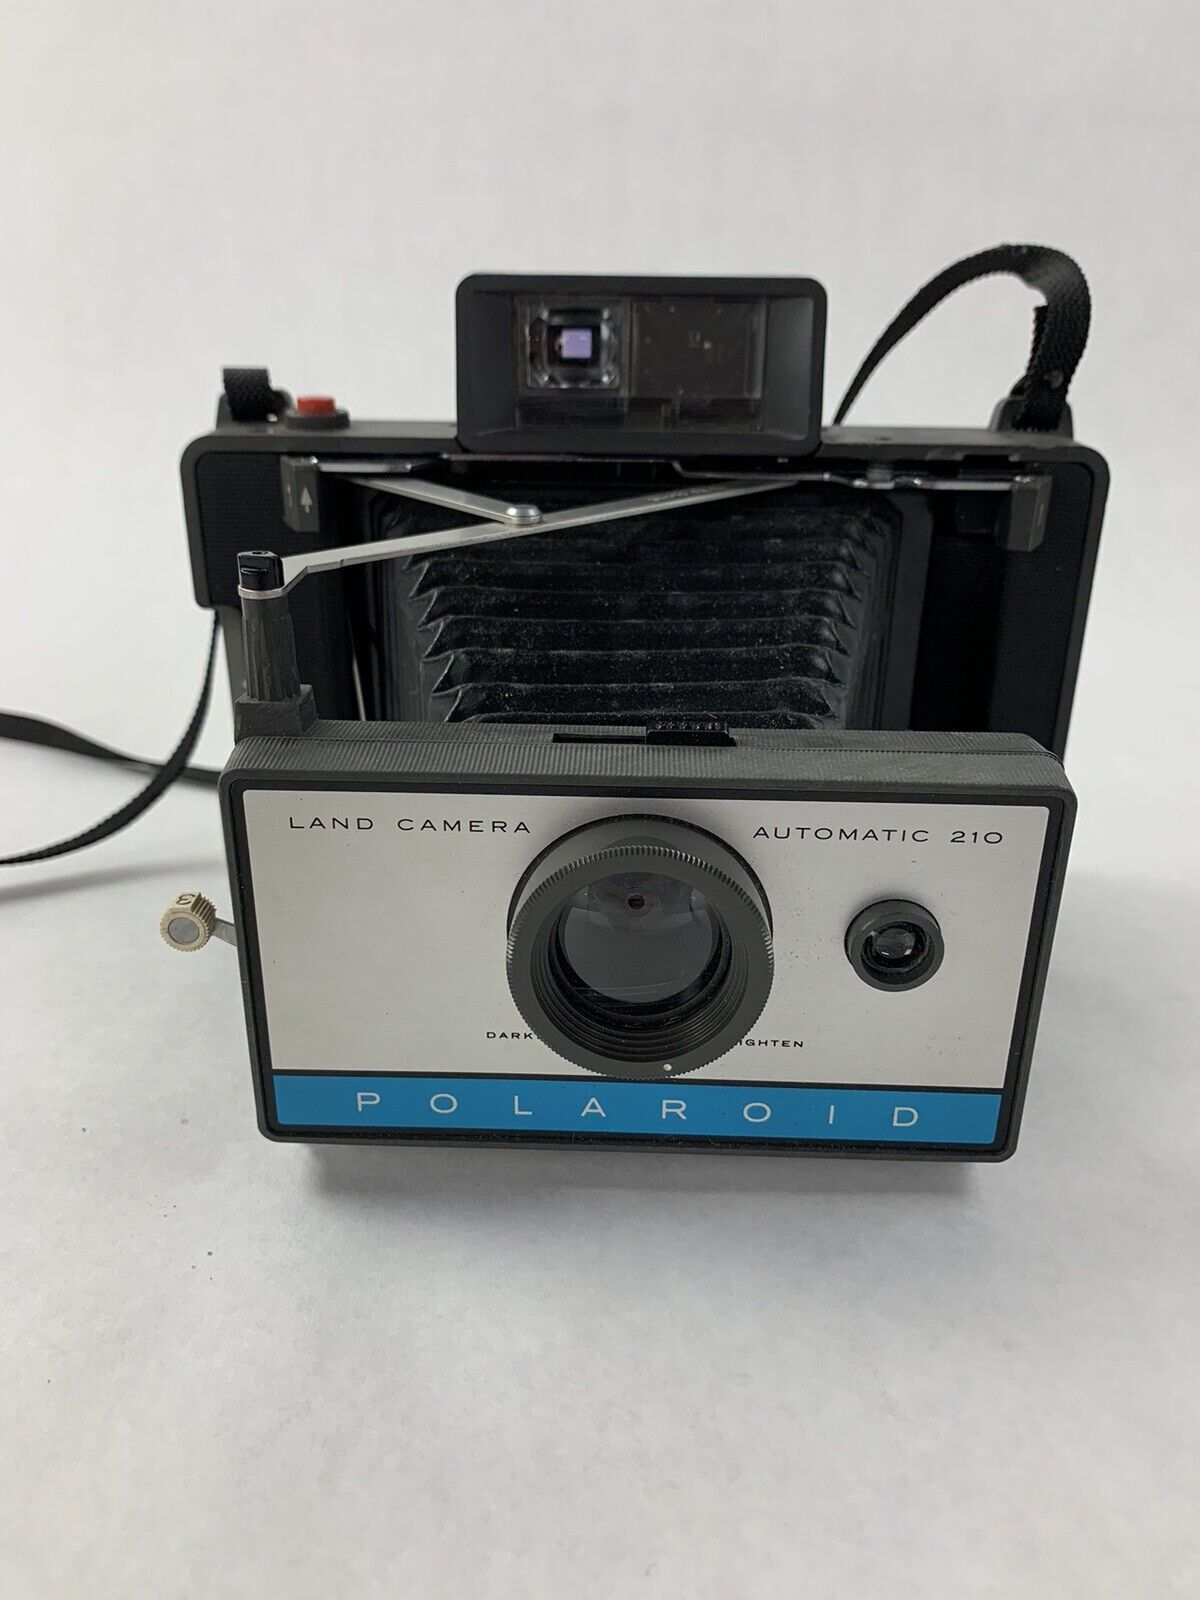 Vintage Polaroid Automatic 210 Land Camera with Case and Manual